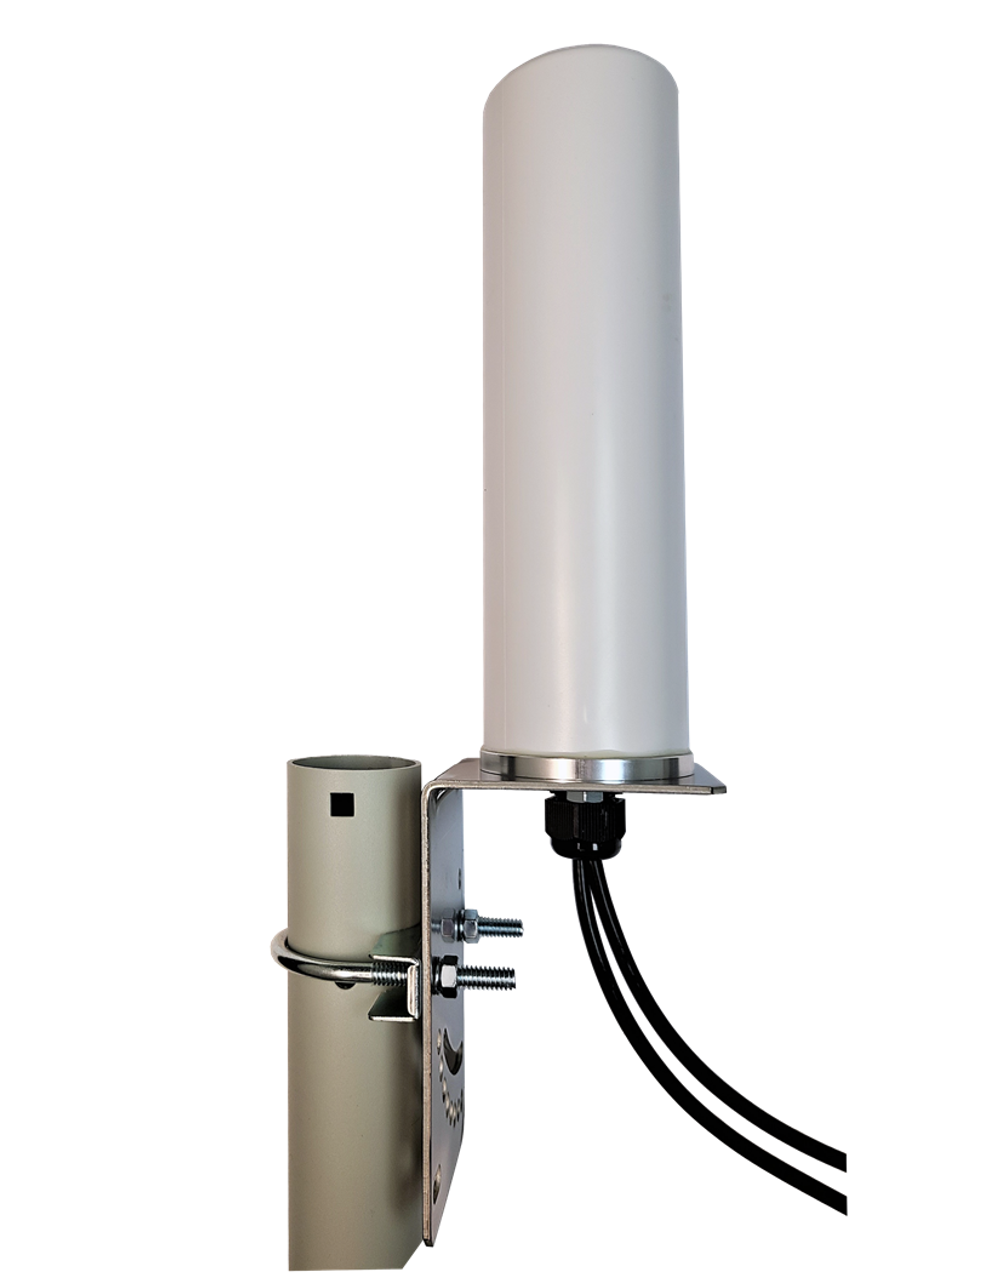 M19B 8.6" Omni Directional MIMO 2 x Cellular 4G LTE GPRS 5G NR IoT M2M Bracket Mount Antenna w/2 x 16ft Coax Cables - Pole Mount